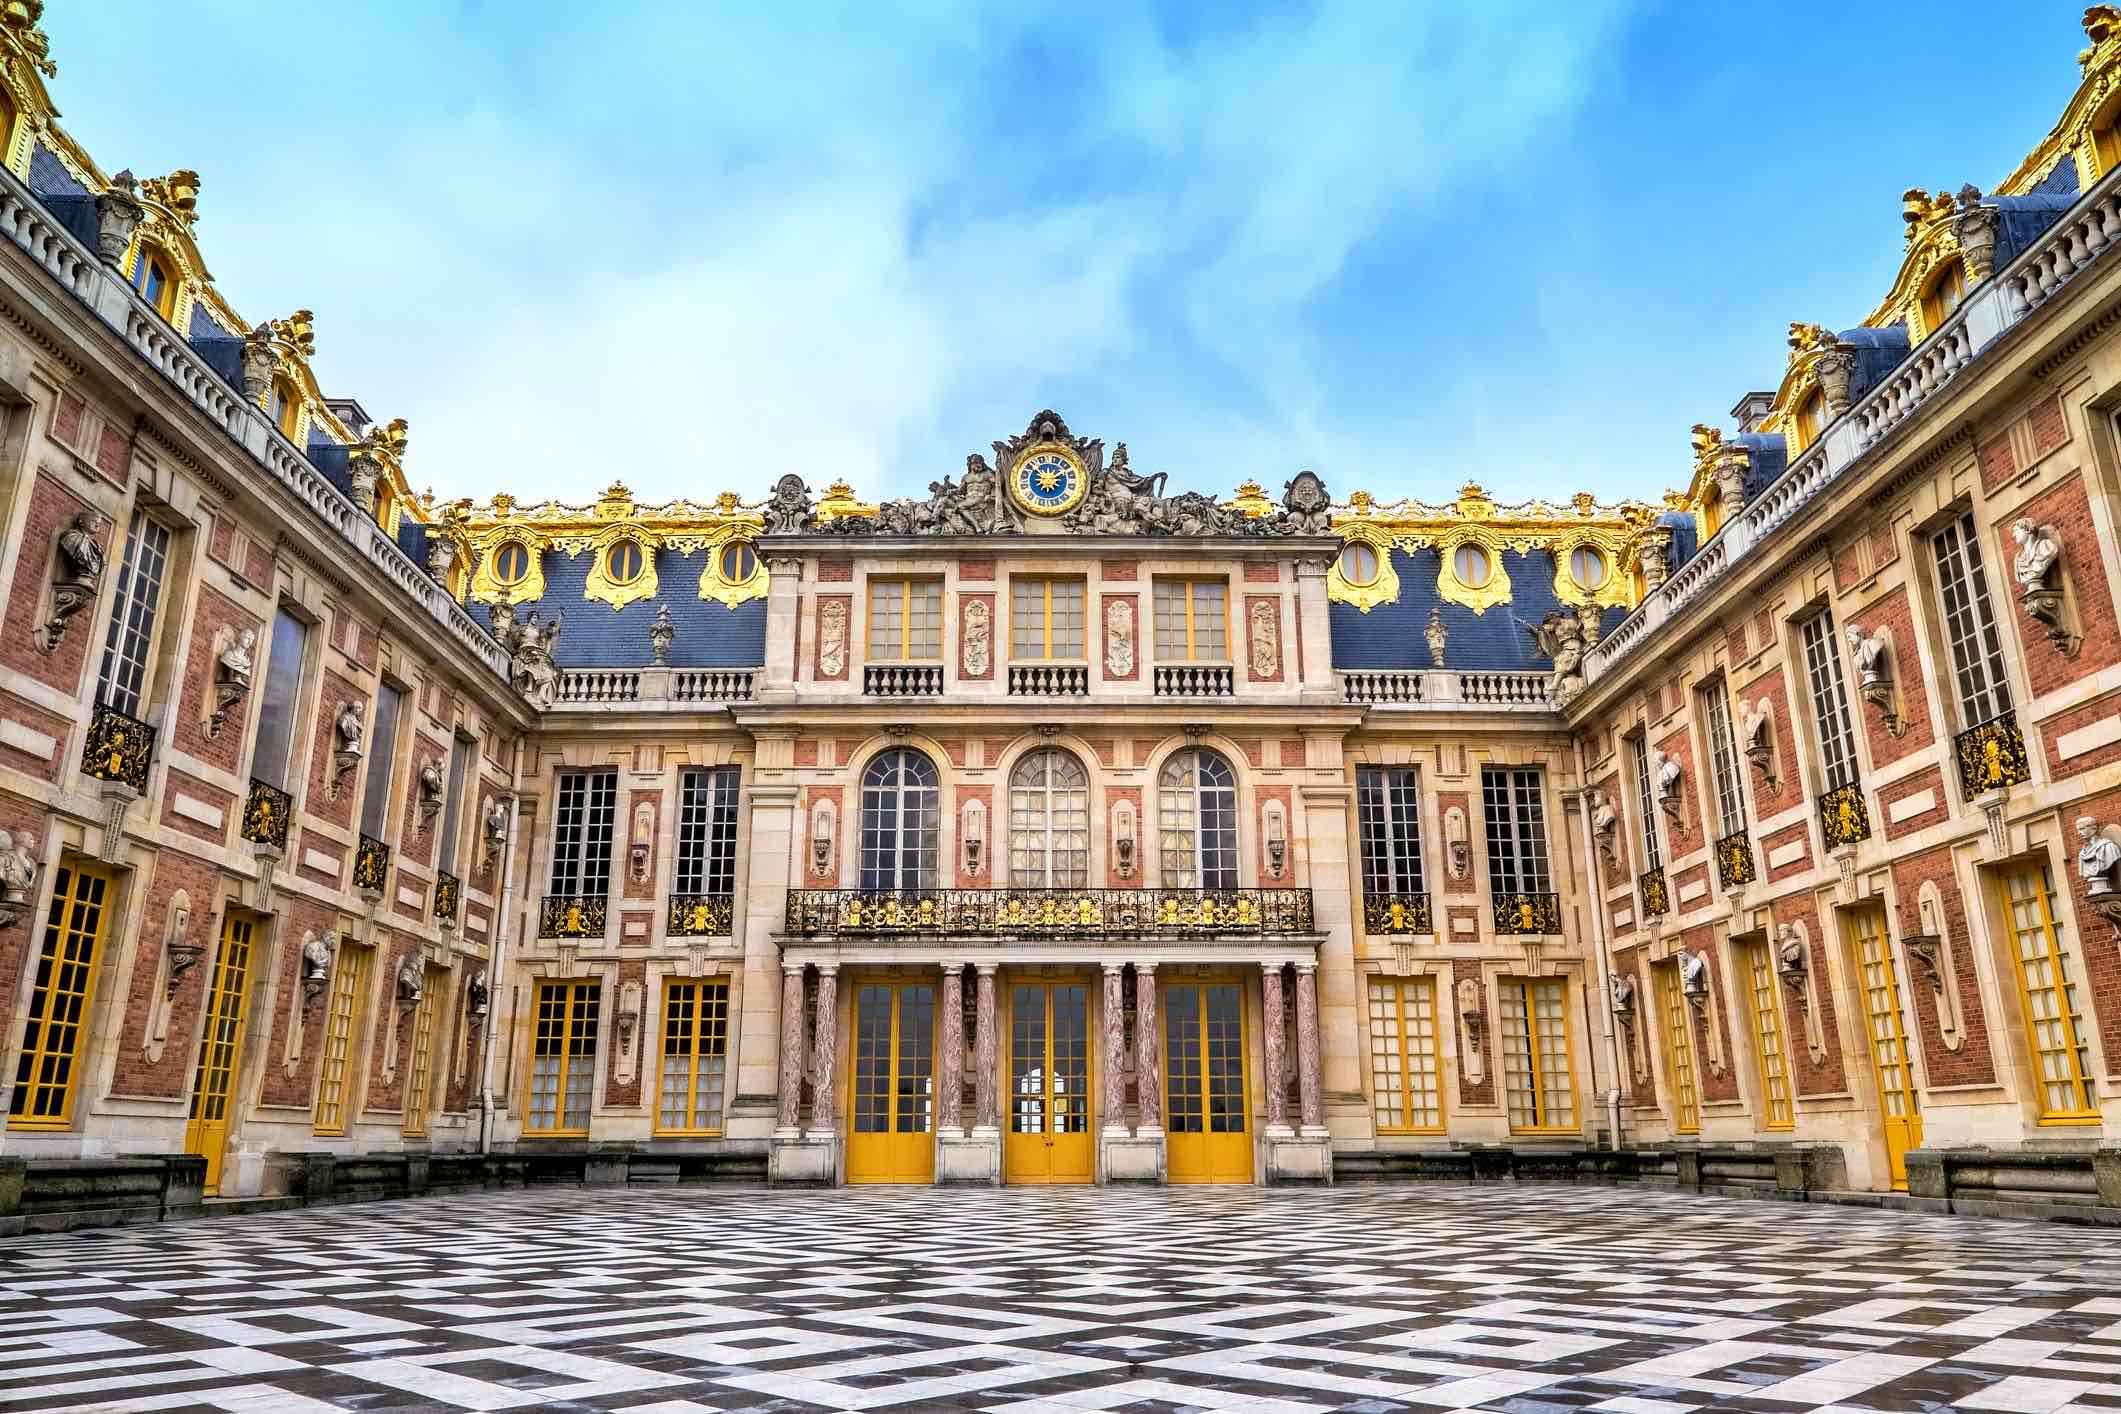 <p>Huge palace in France, legitimized power in France</p>